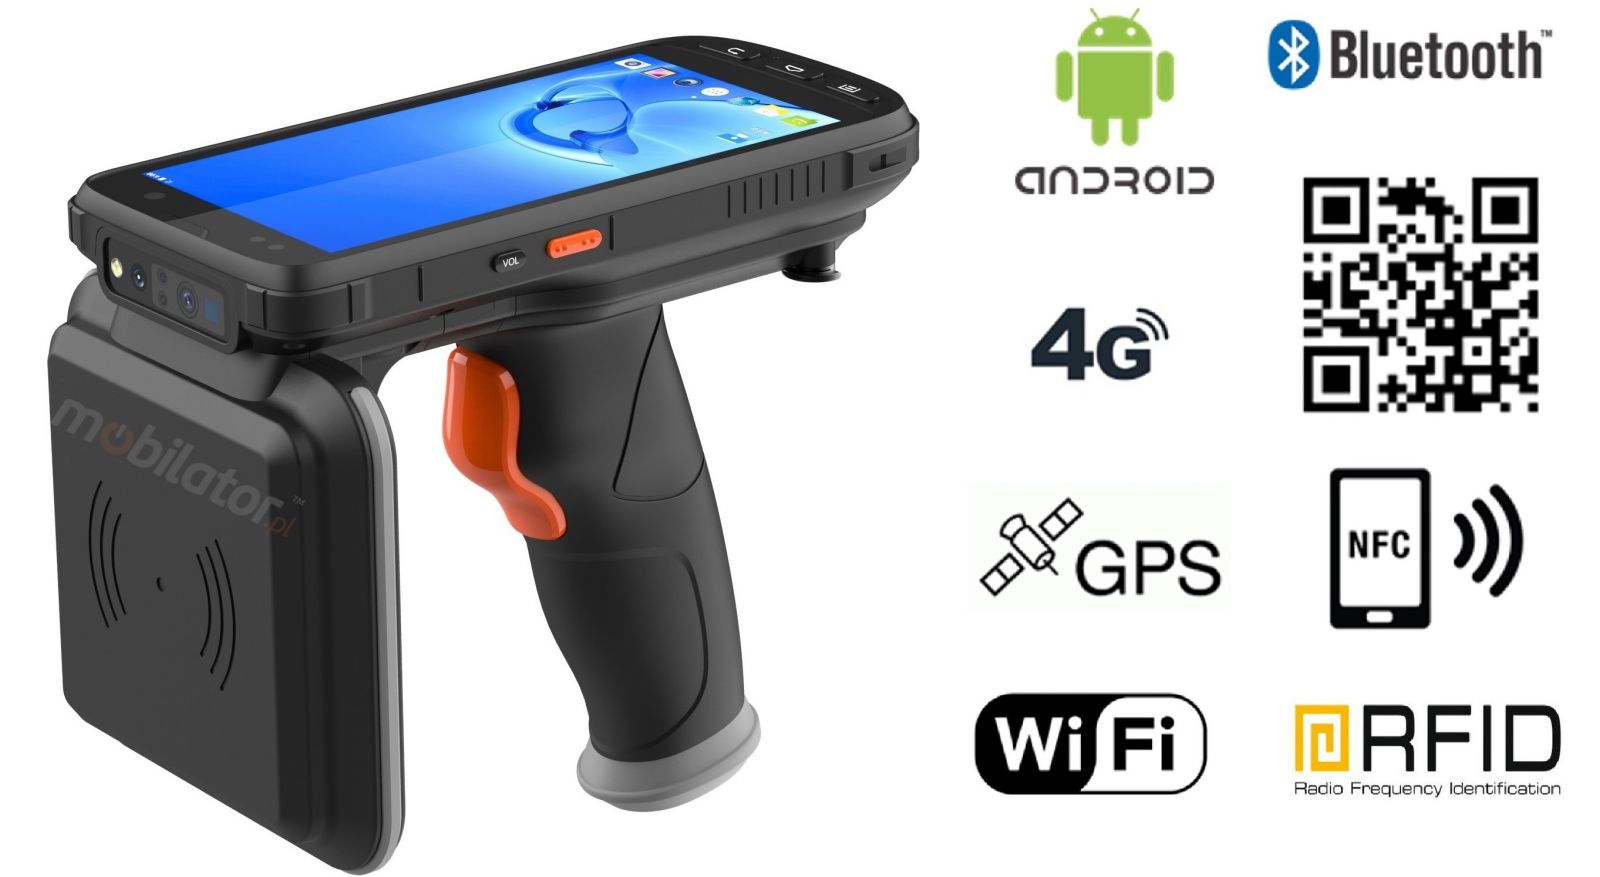 MobiPad XX-B6 v.7 - Collector-inventory (IP65) with a 2D code scanner (Mindeo ME5600) and NFC + 4G LTE + Bluetooth + WiFi + UHF 18m + Pistol Grip